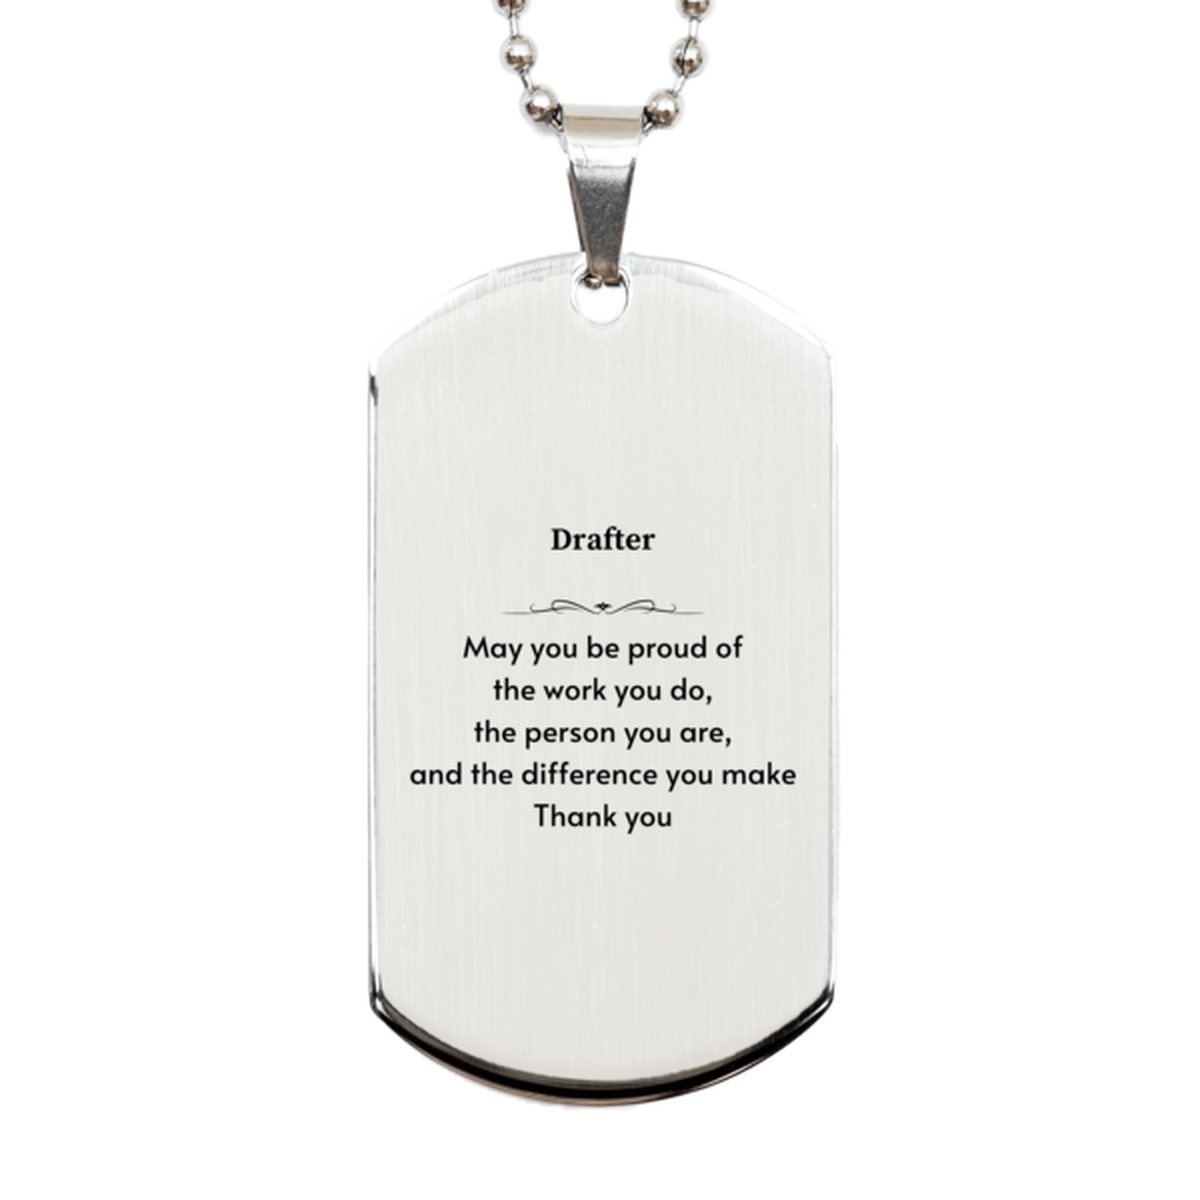 Heartwarming Silver Dog Tag Retirement Coworkers Gifts for Drafter, Drafter May You be proud of the work you do, the person you are Gifts for Boss Men Women Friends